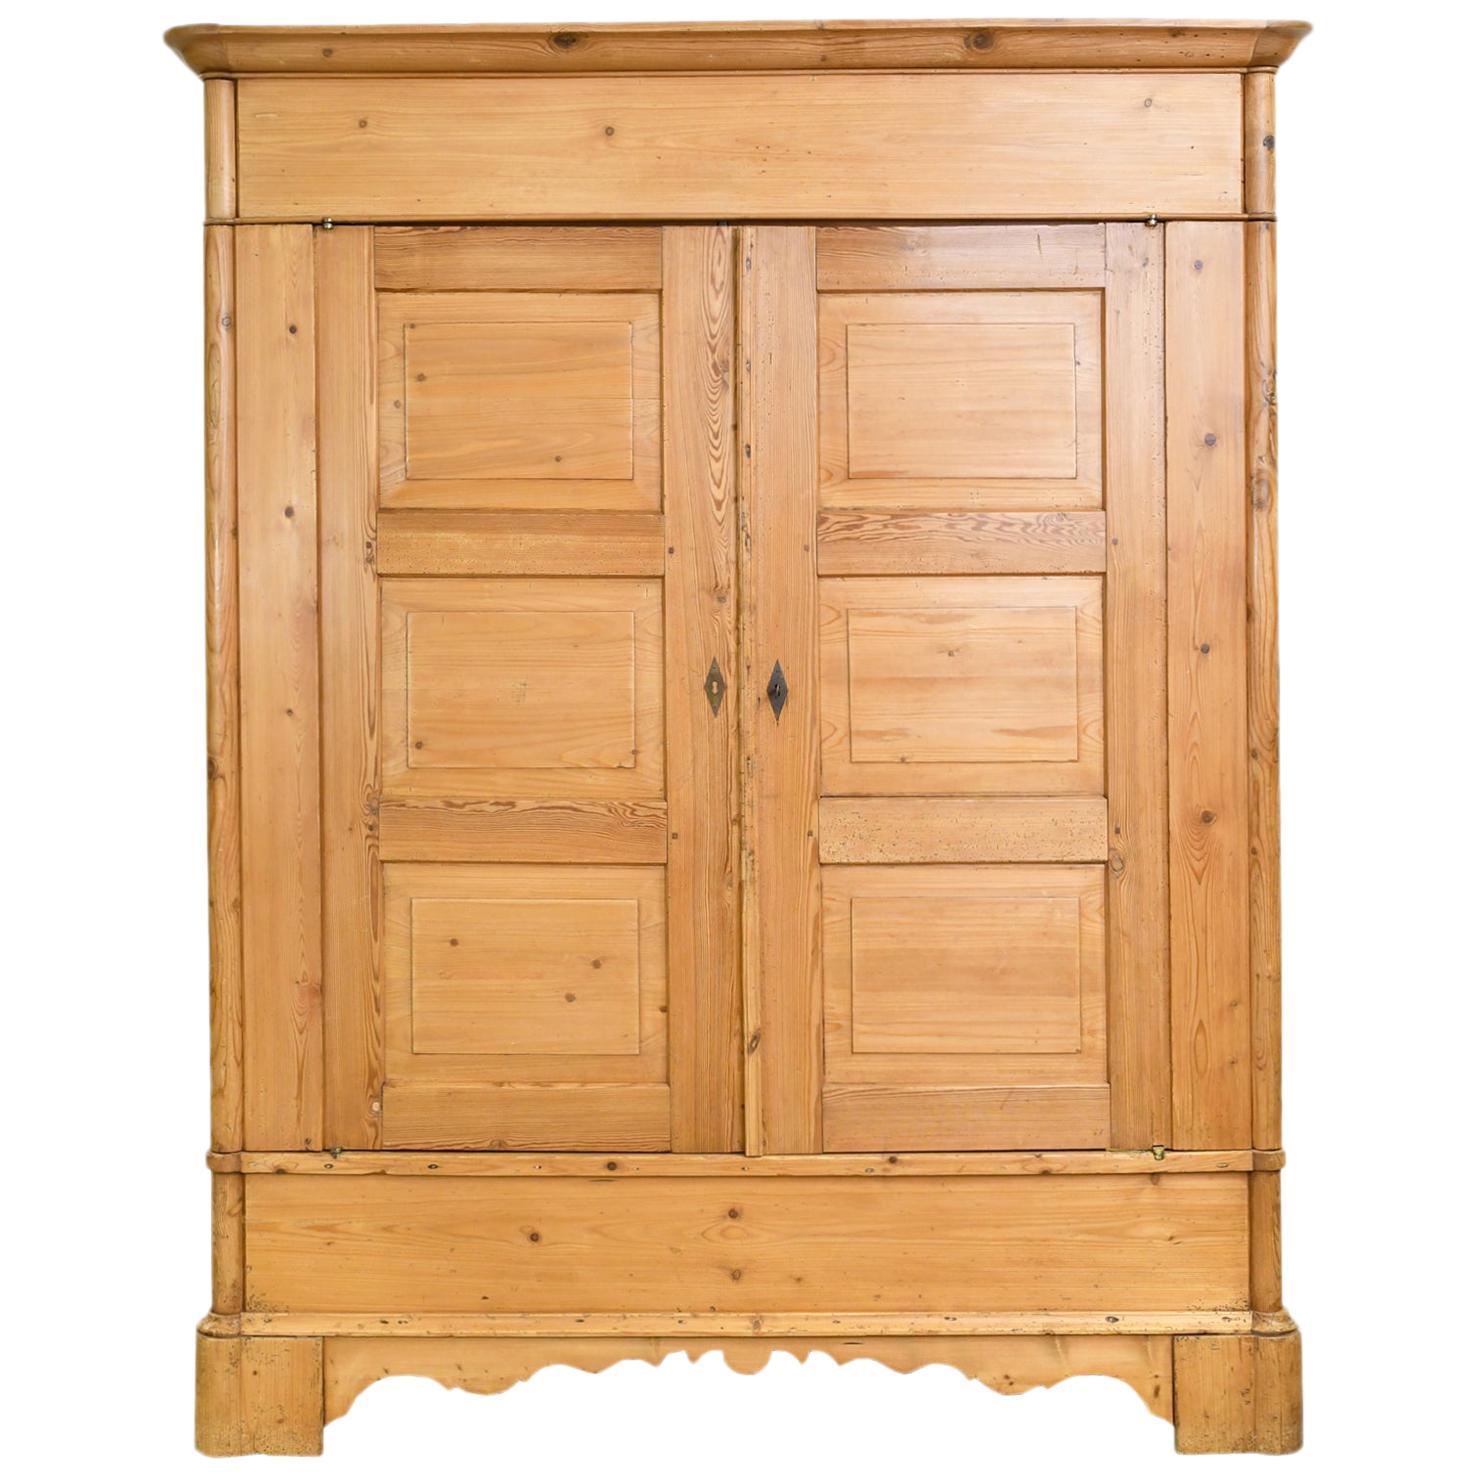 Biedermeier Inspired Scrubbed Pine Armoire from Northern Germany, circa 1820